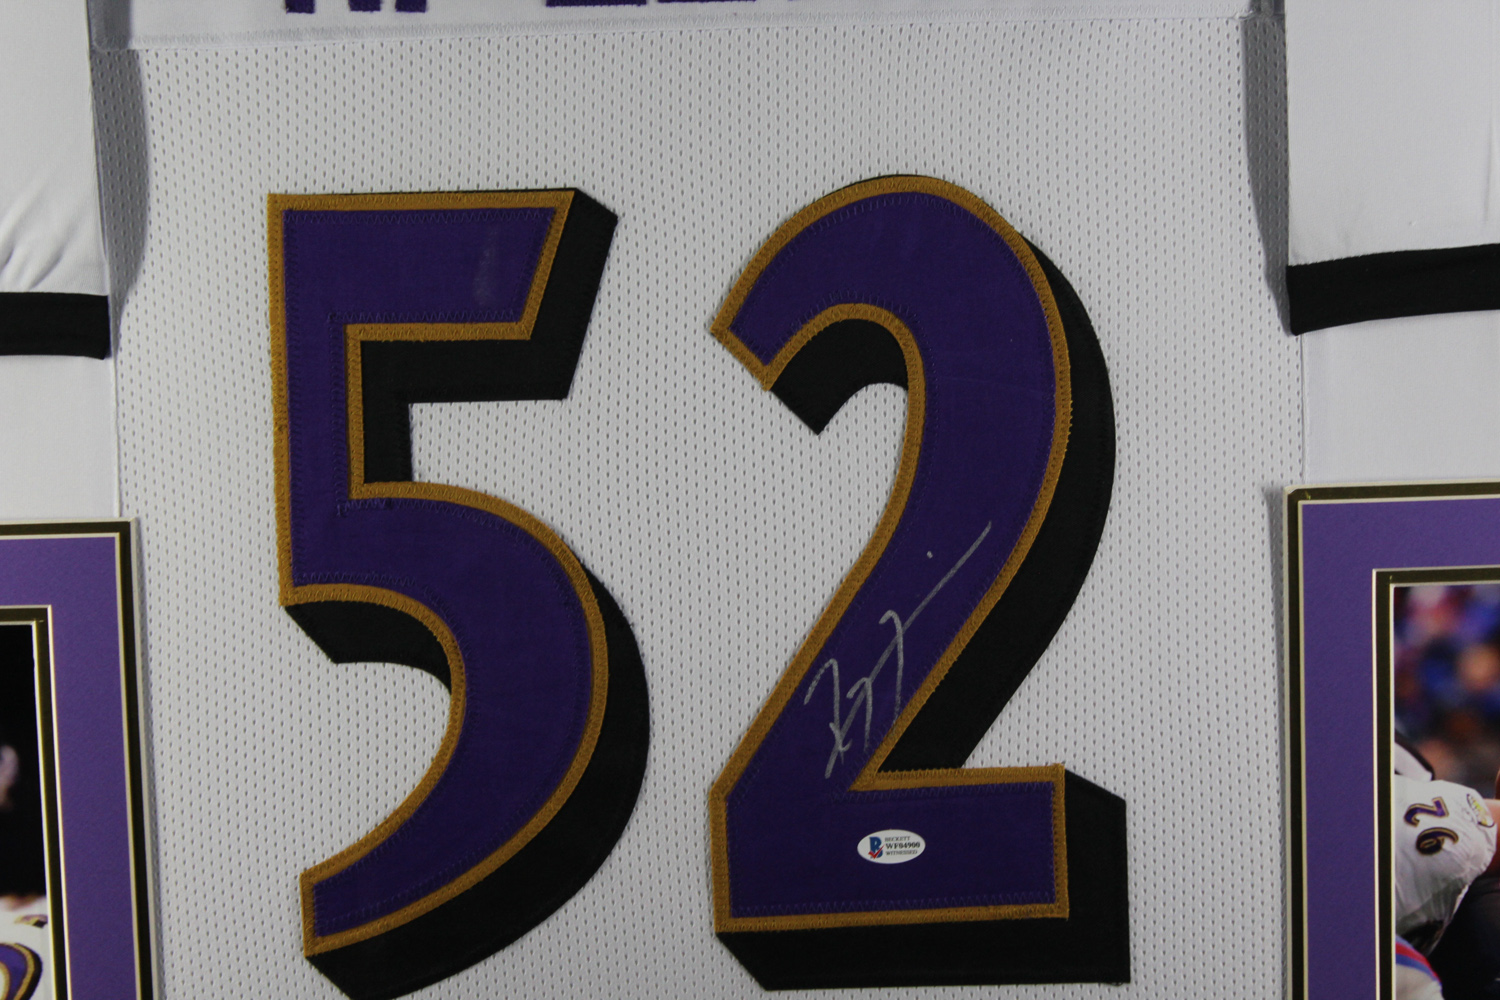 Ray Lewis Autographed/Signed Pro Style Framed White XL Jersey Beckett